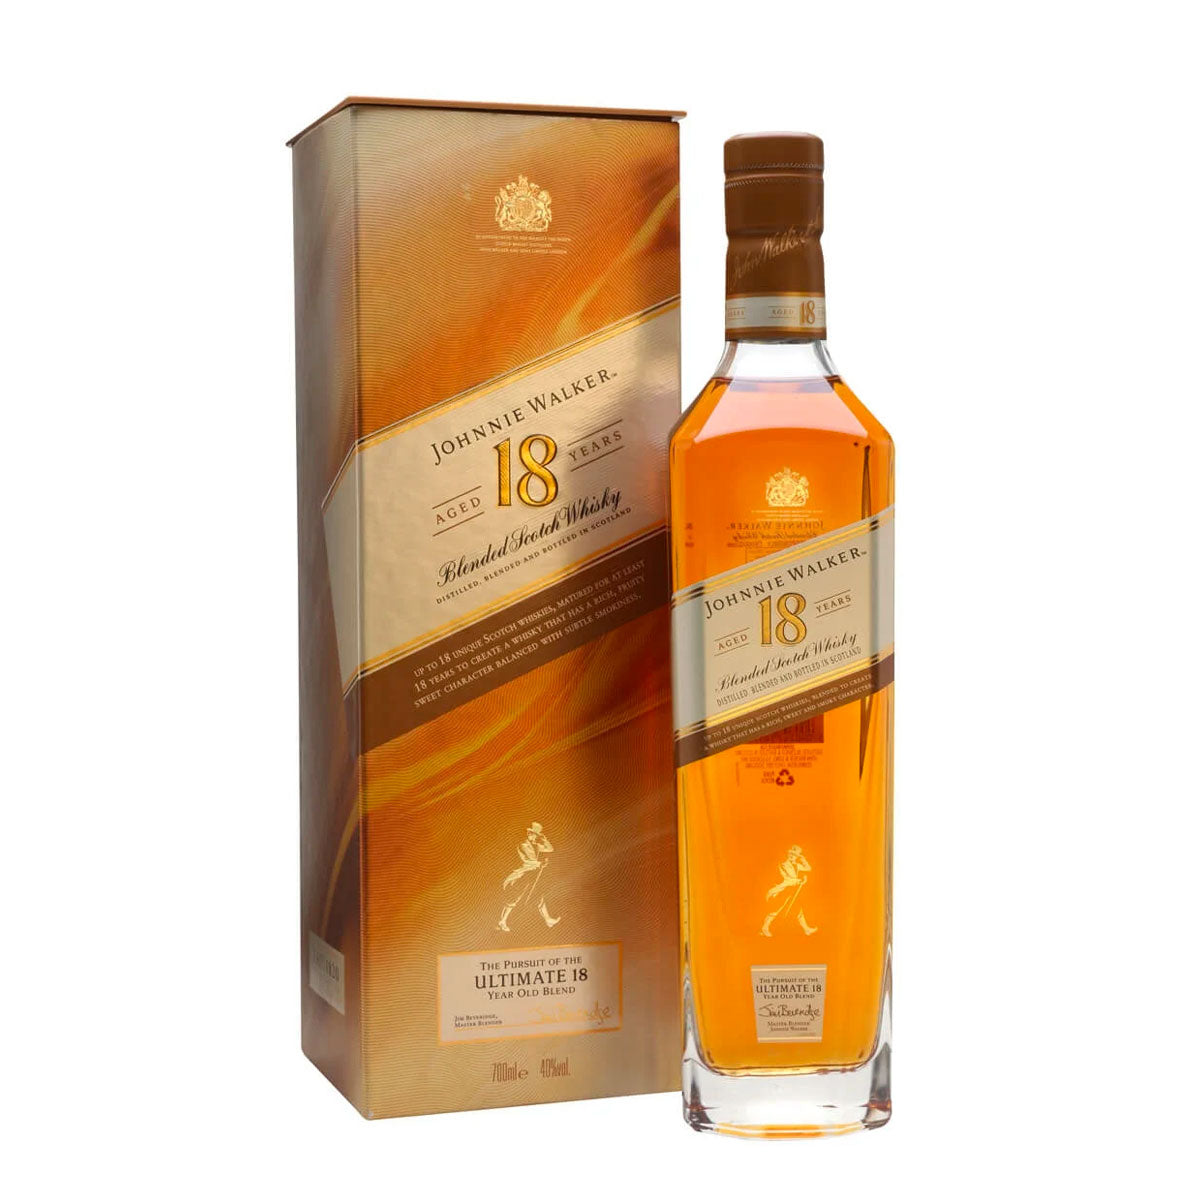 TAG Liquor Stores BC-JOHNNIE WALKER 18 YEAR OLD WHISKEY 750ML